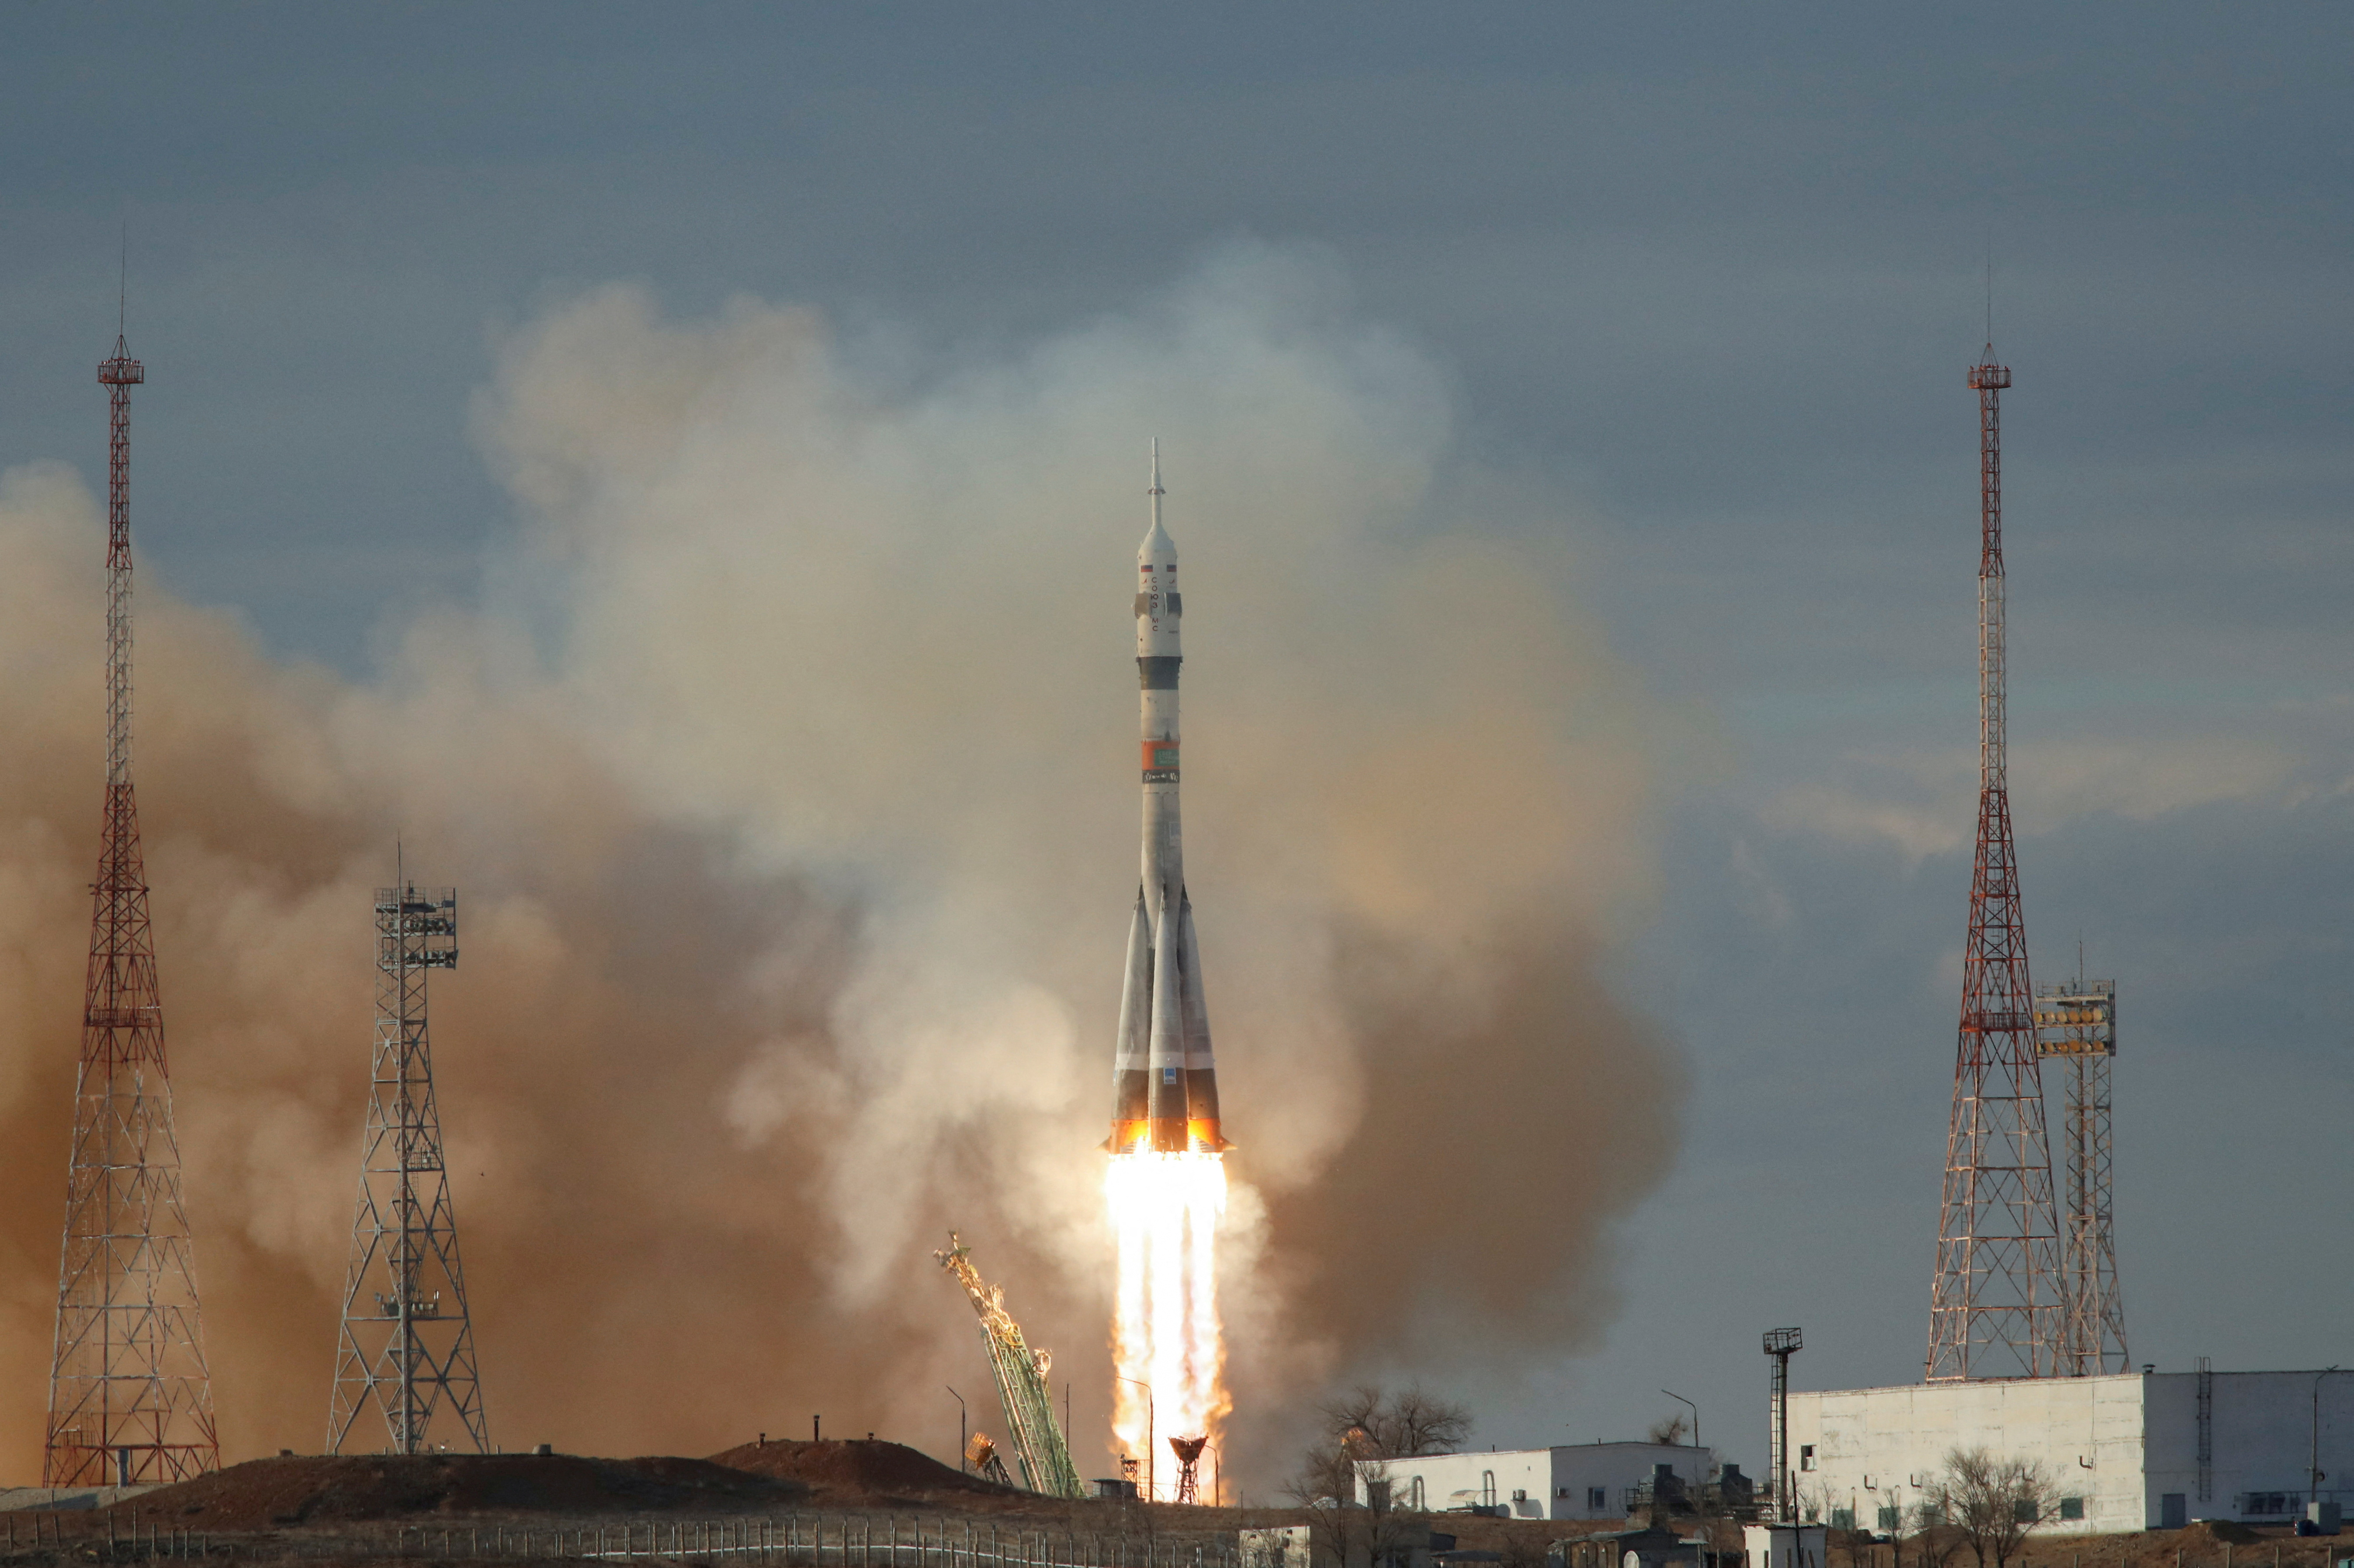 The Soyuz MS-25 spacecraft blasts off to the International Space Station (ISS) from the launchpad at the Baikonur Cosmodrome